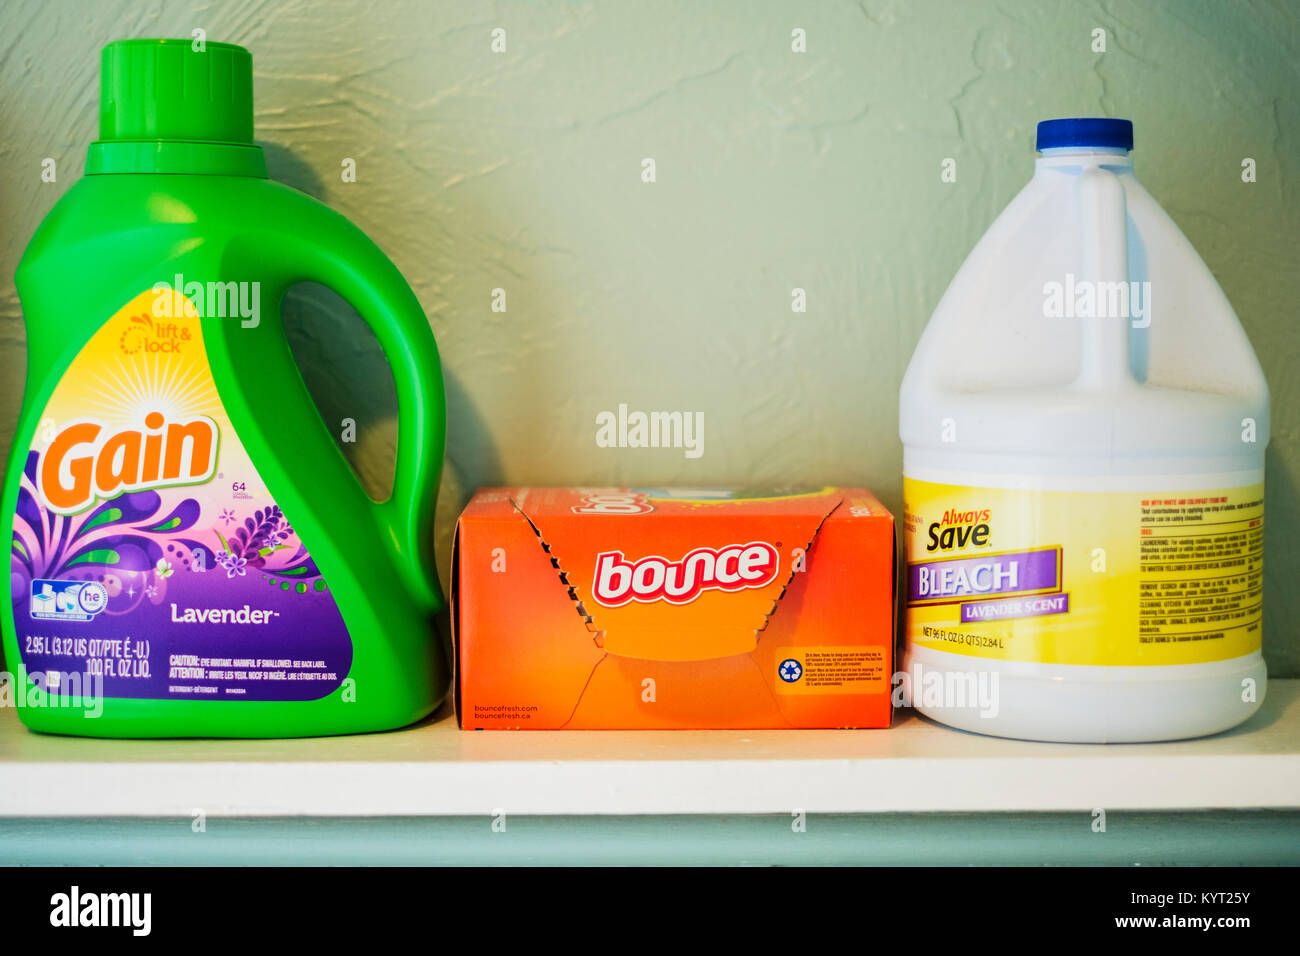 A laundry shelf containing Gain laundry detergent, a box of bounce dryer sheets, and a bottle of chlorine bleach. American, Oklahoma, USA. Stock Photo